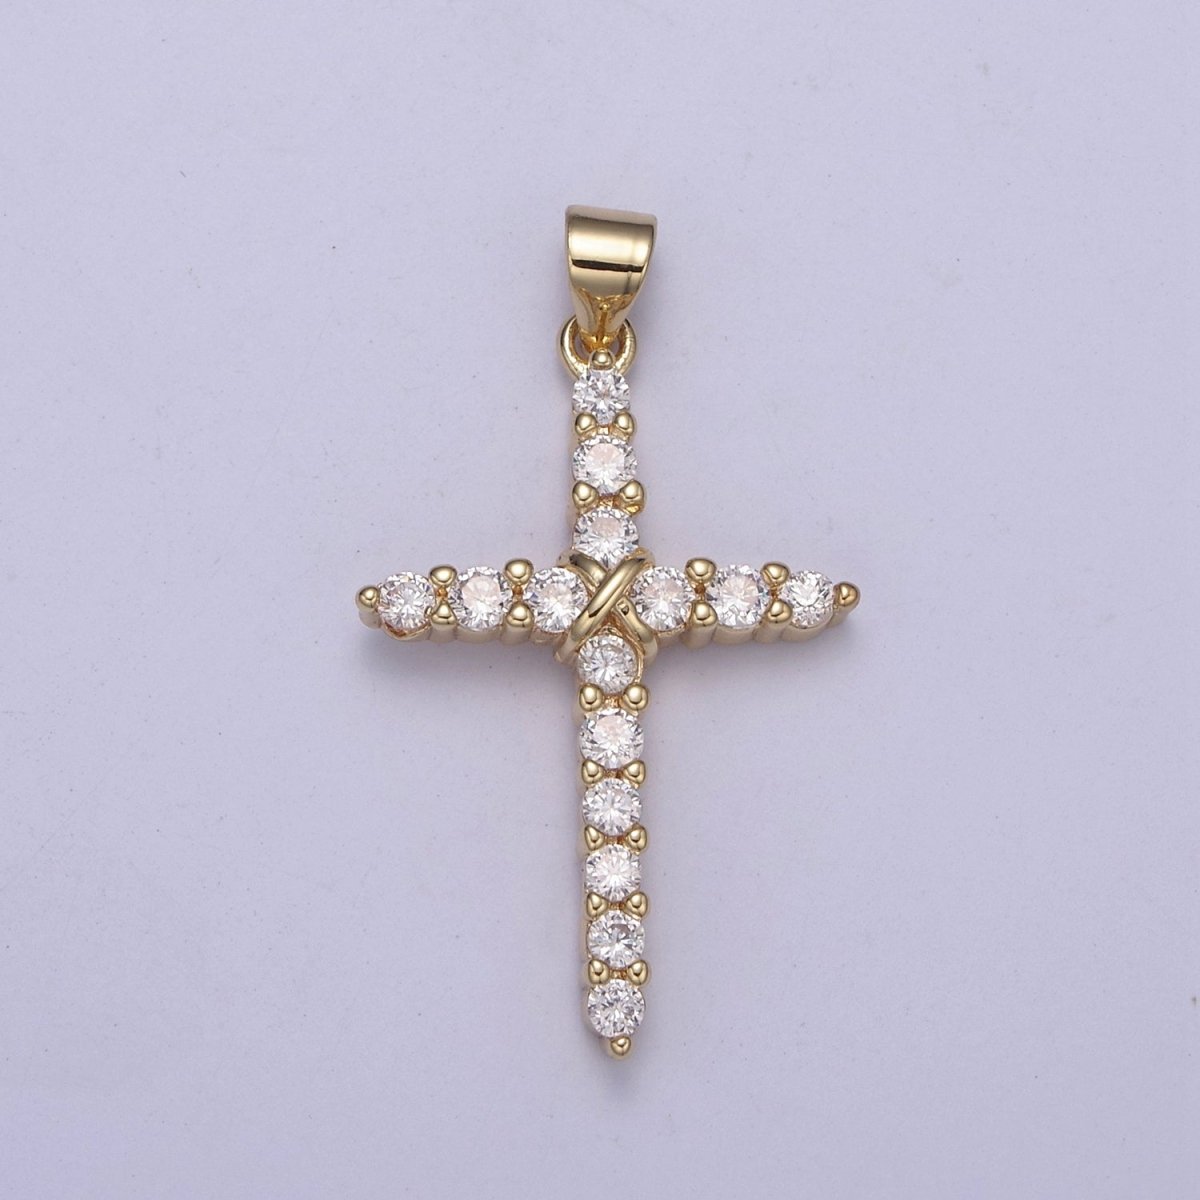 Dainty CZ Micro Pave Cross Pendant 14K Gold Filled Charm Cubic Zirconia Cross for Religious Jewelry Making H-399 - DLUXCA